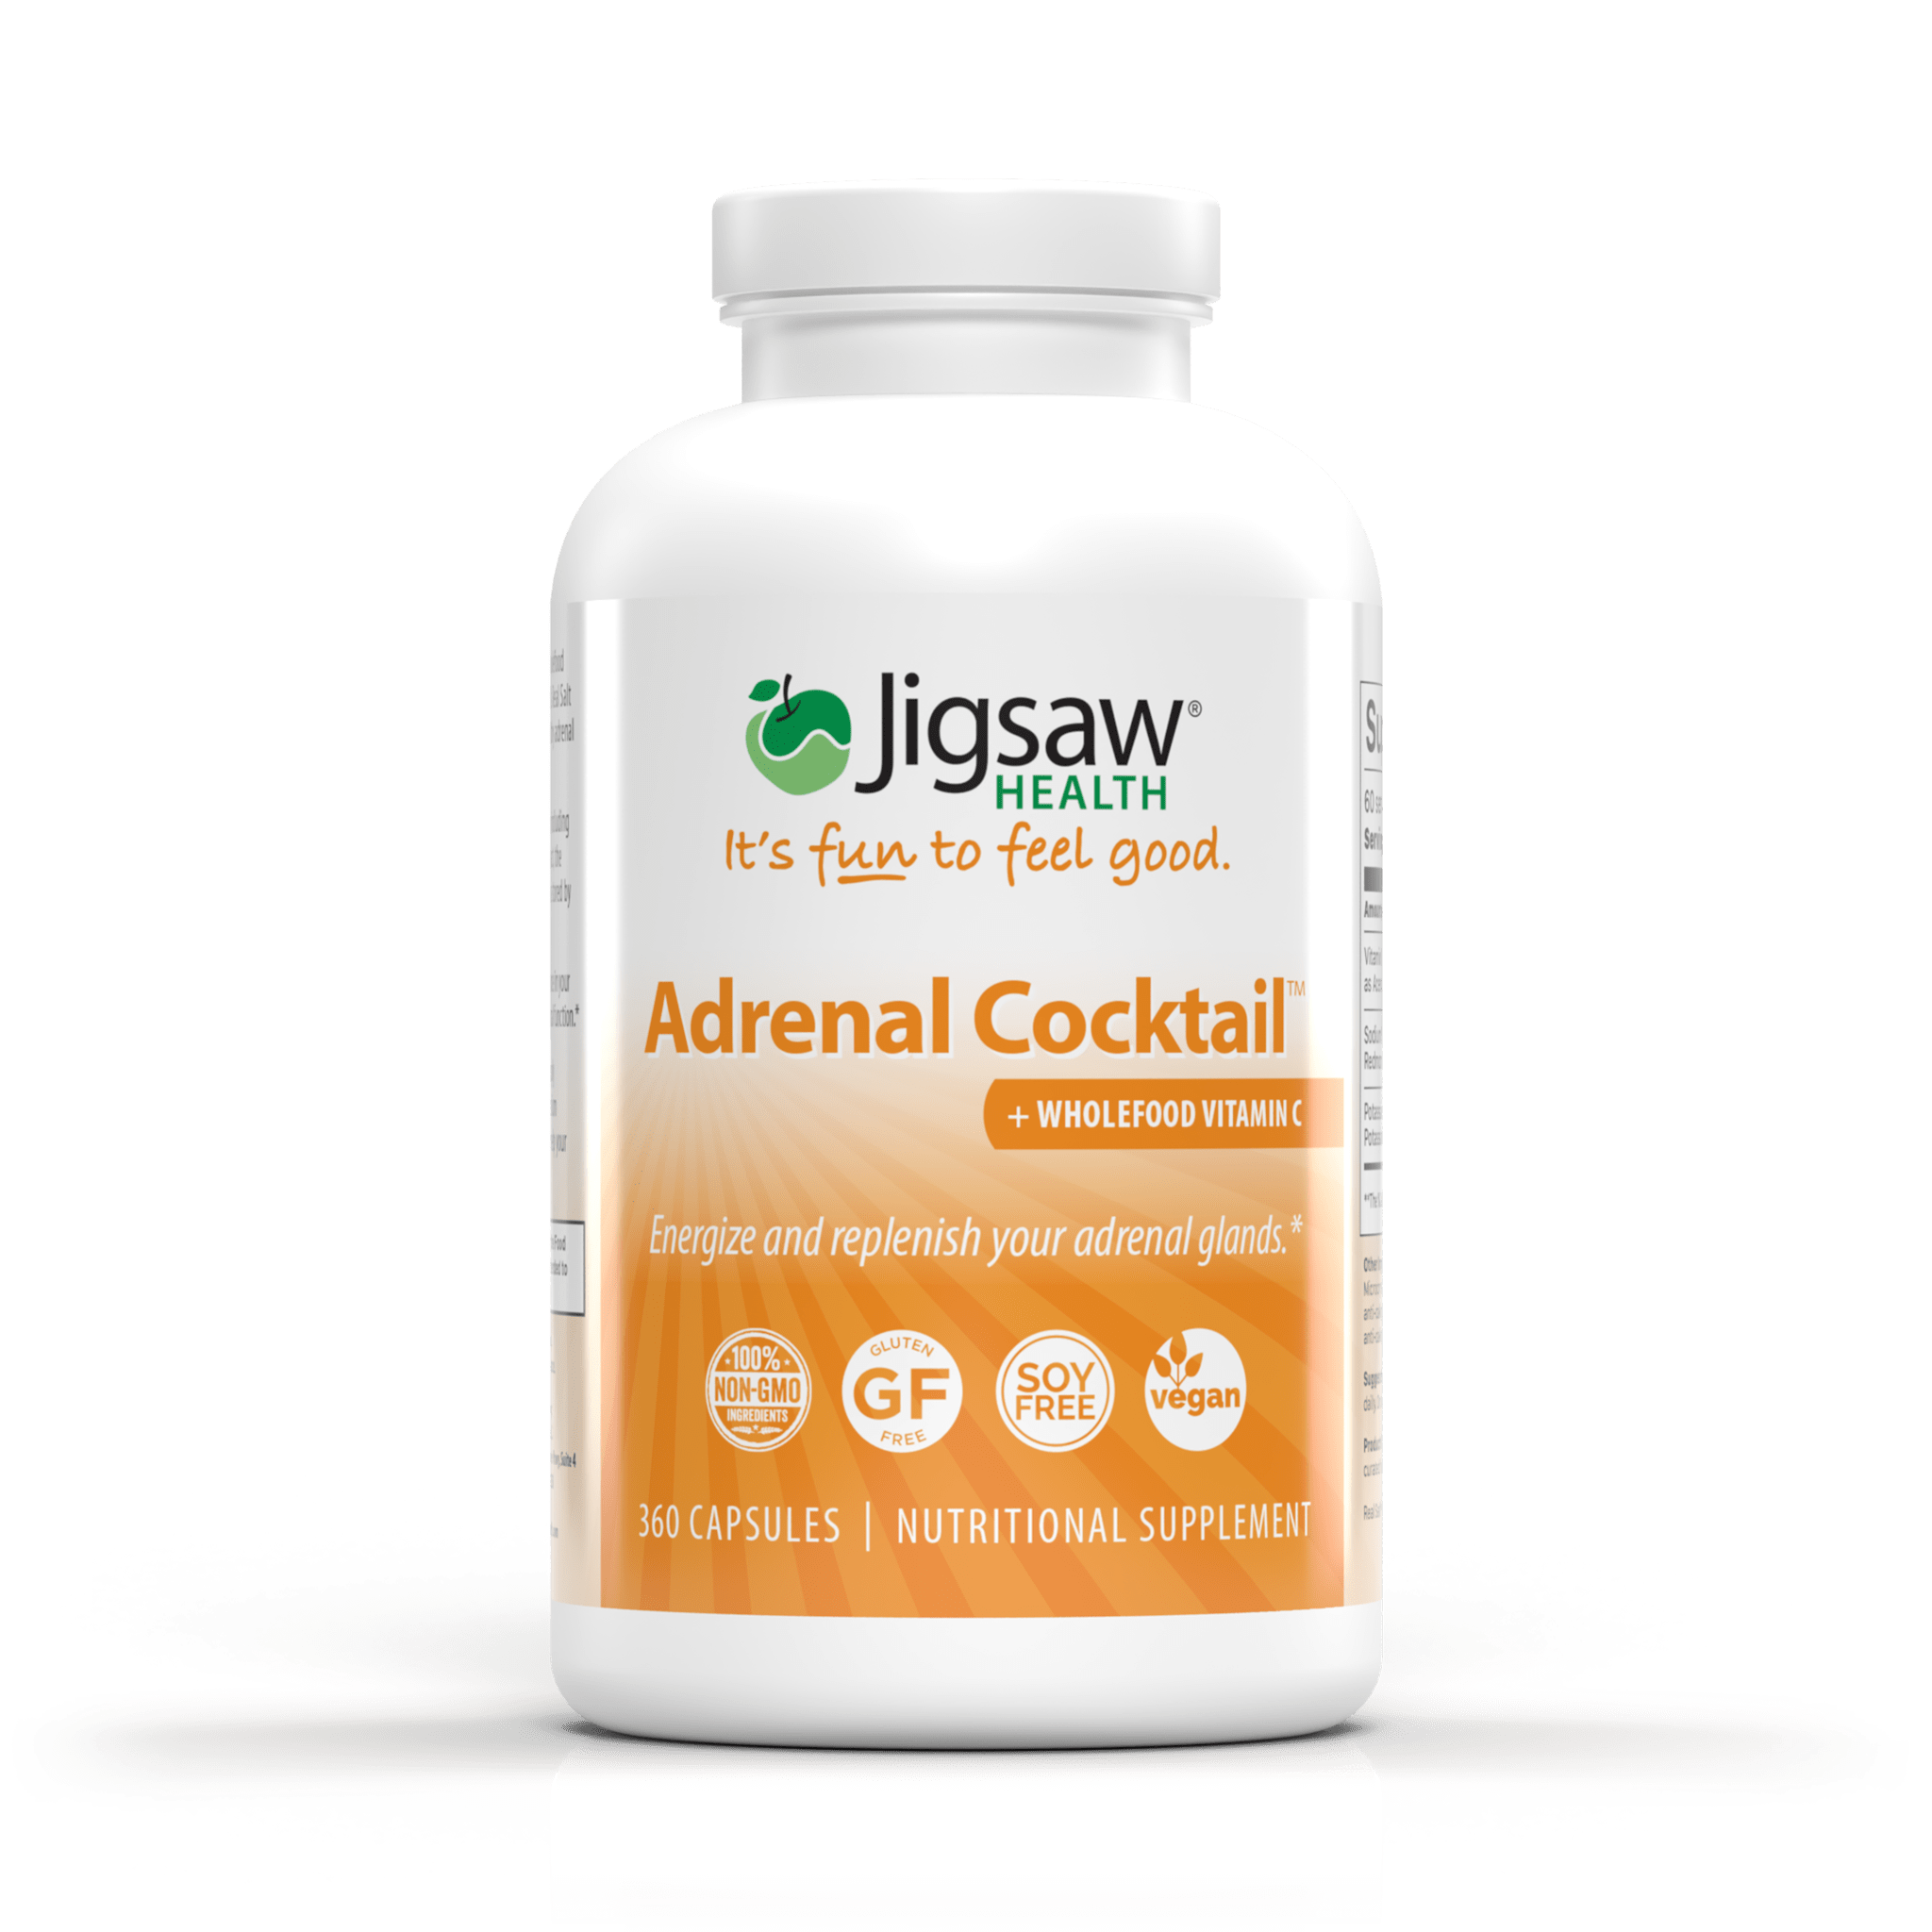 Jigsaw Health Adrenal Cocktail Capsules